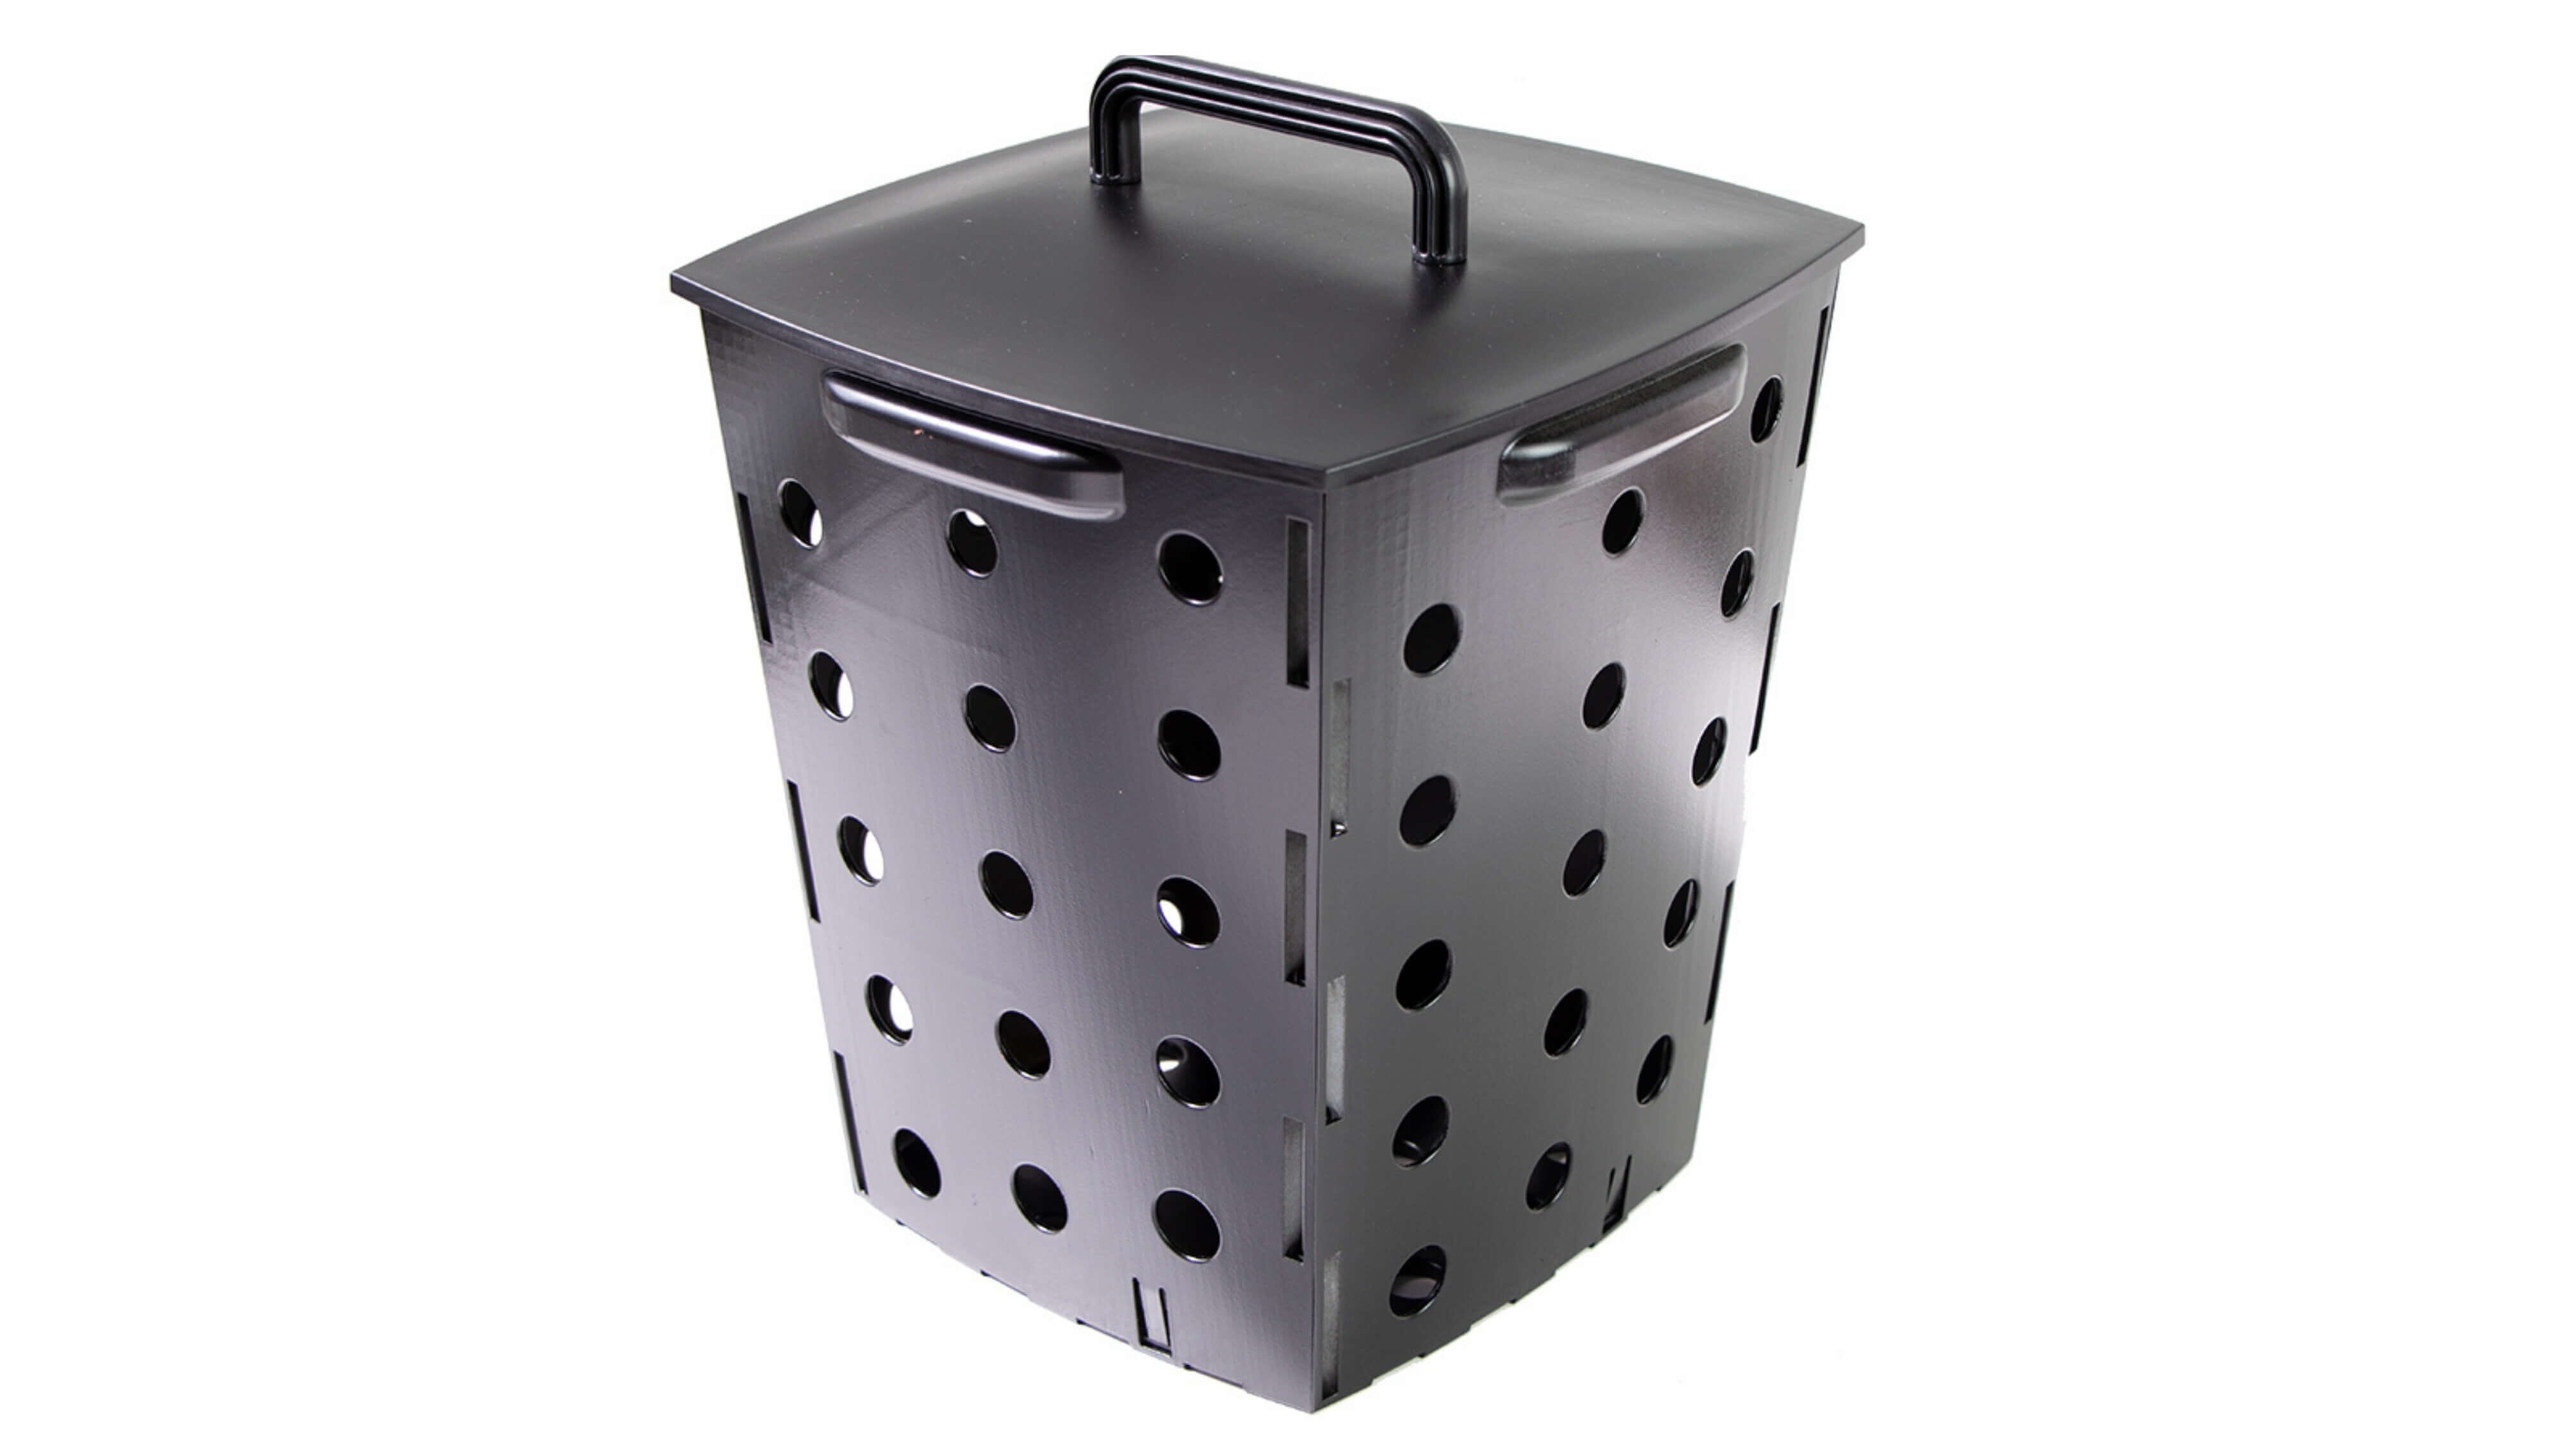 The ‘Worm It All’ Worm Composter Bin - 11” x 11” x 12.6” Composting Box (Soil Enrichment)